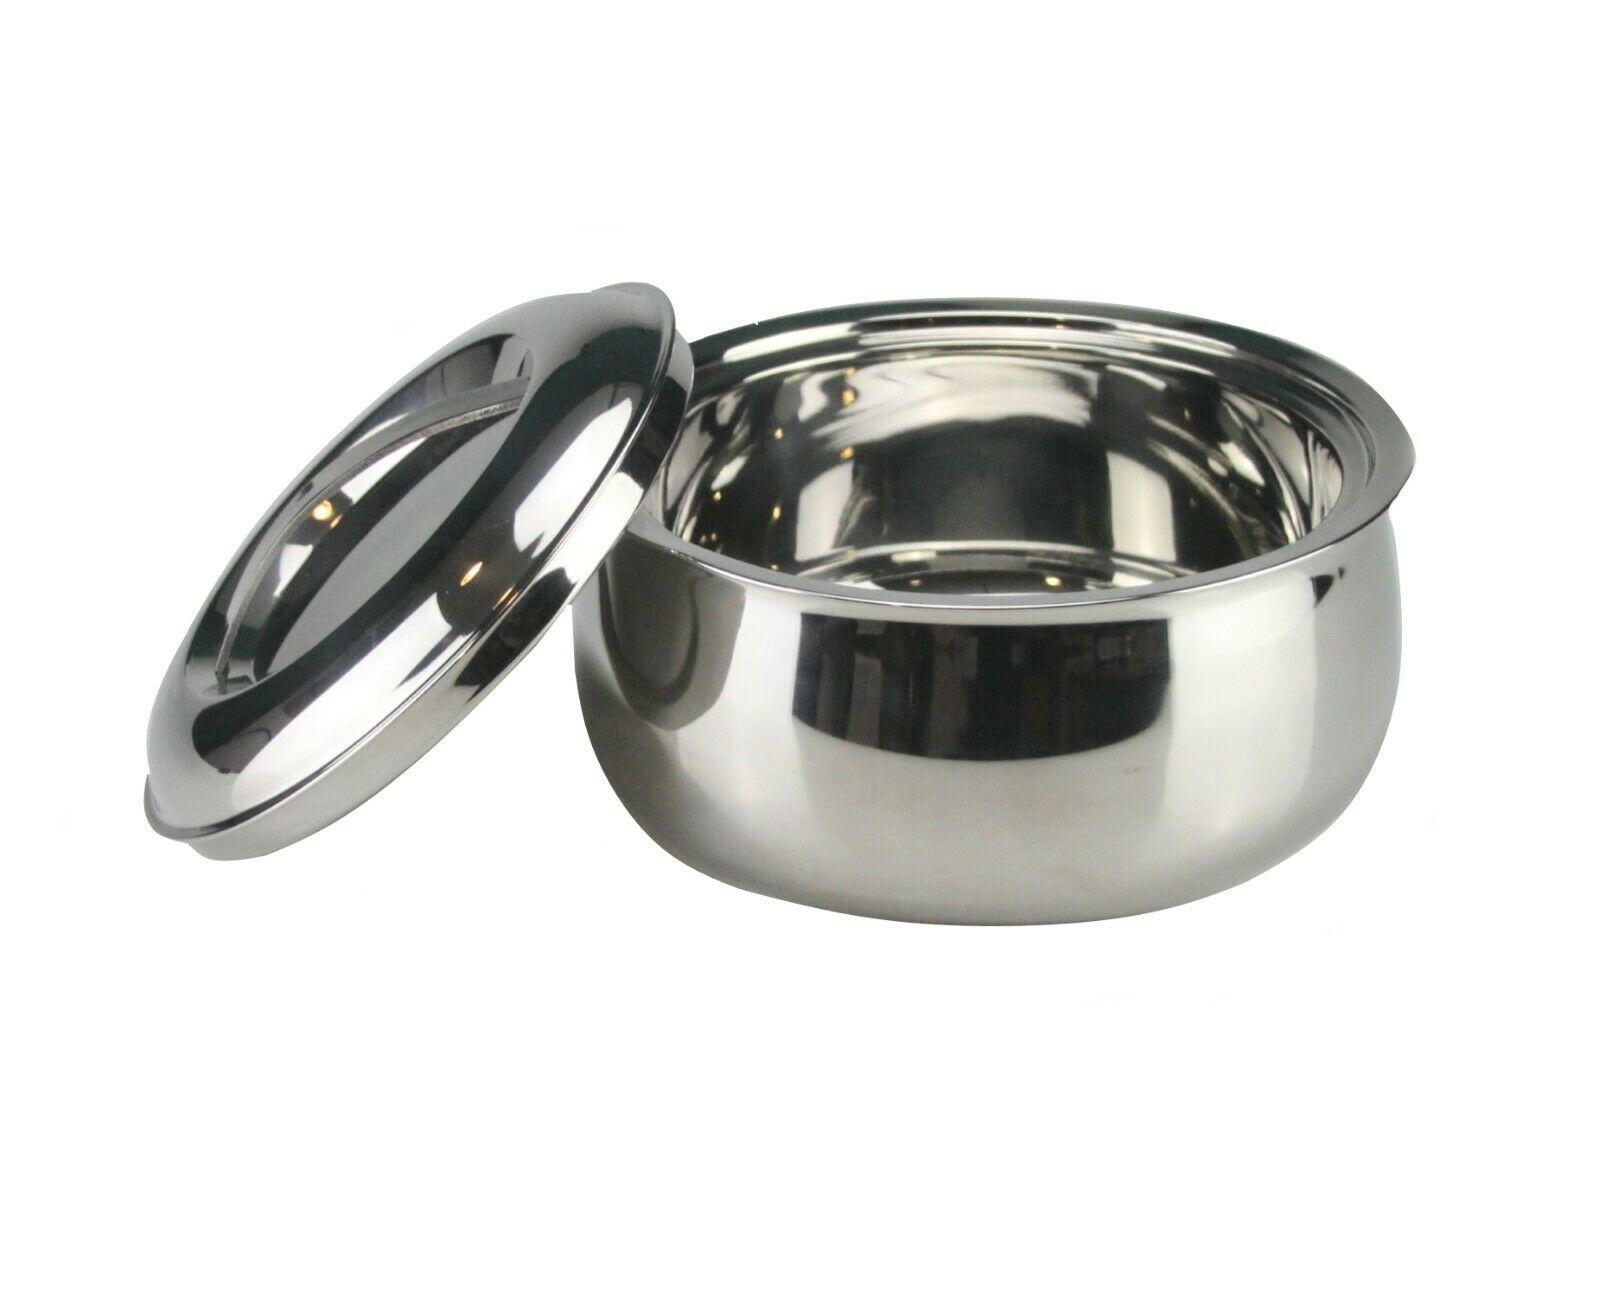 Stainless Steel Hot Pot Insulated Food Warmer Storage Casserole Dish ...